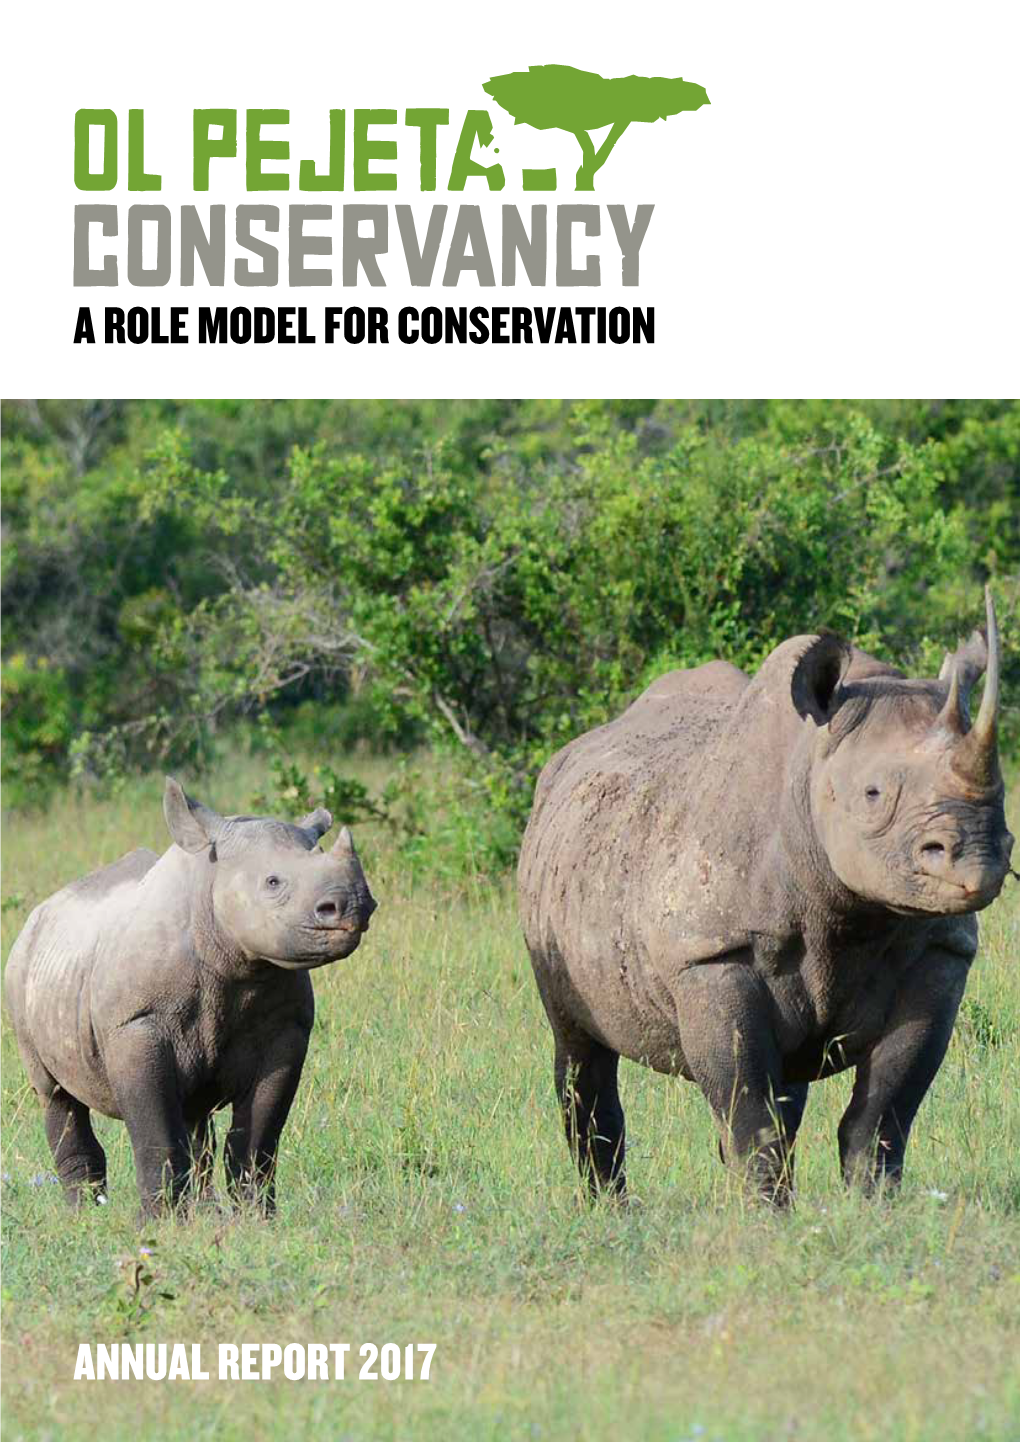 Annual Report 2017 a Role Model for Conservation